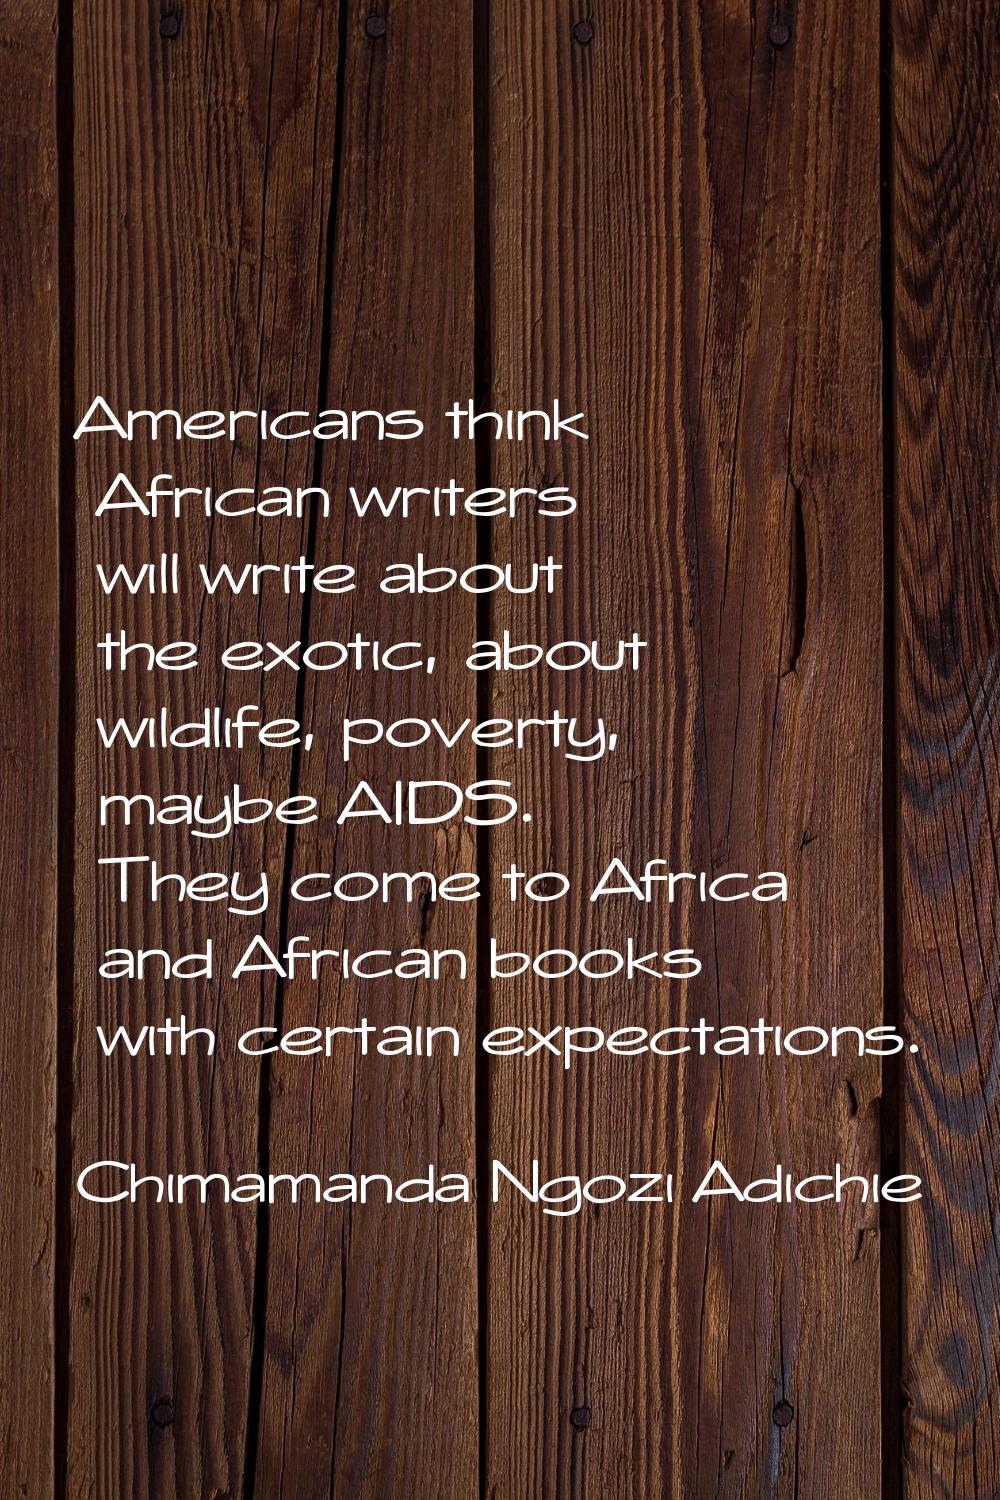 Americans think African writers will write about the exotic, about wildlife, poverty, maybe AIDS. T